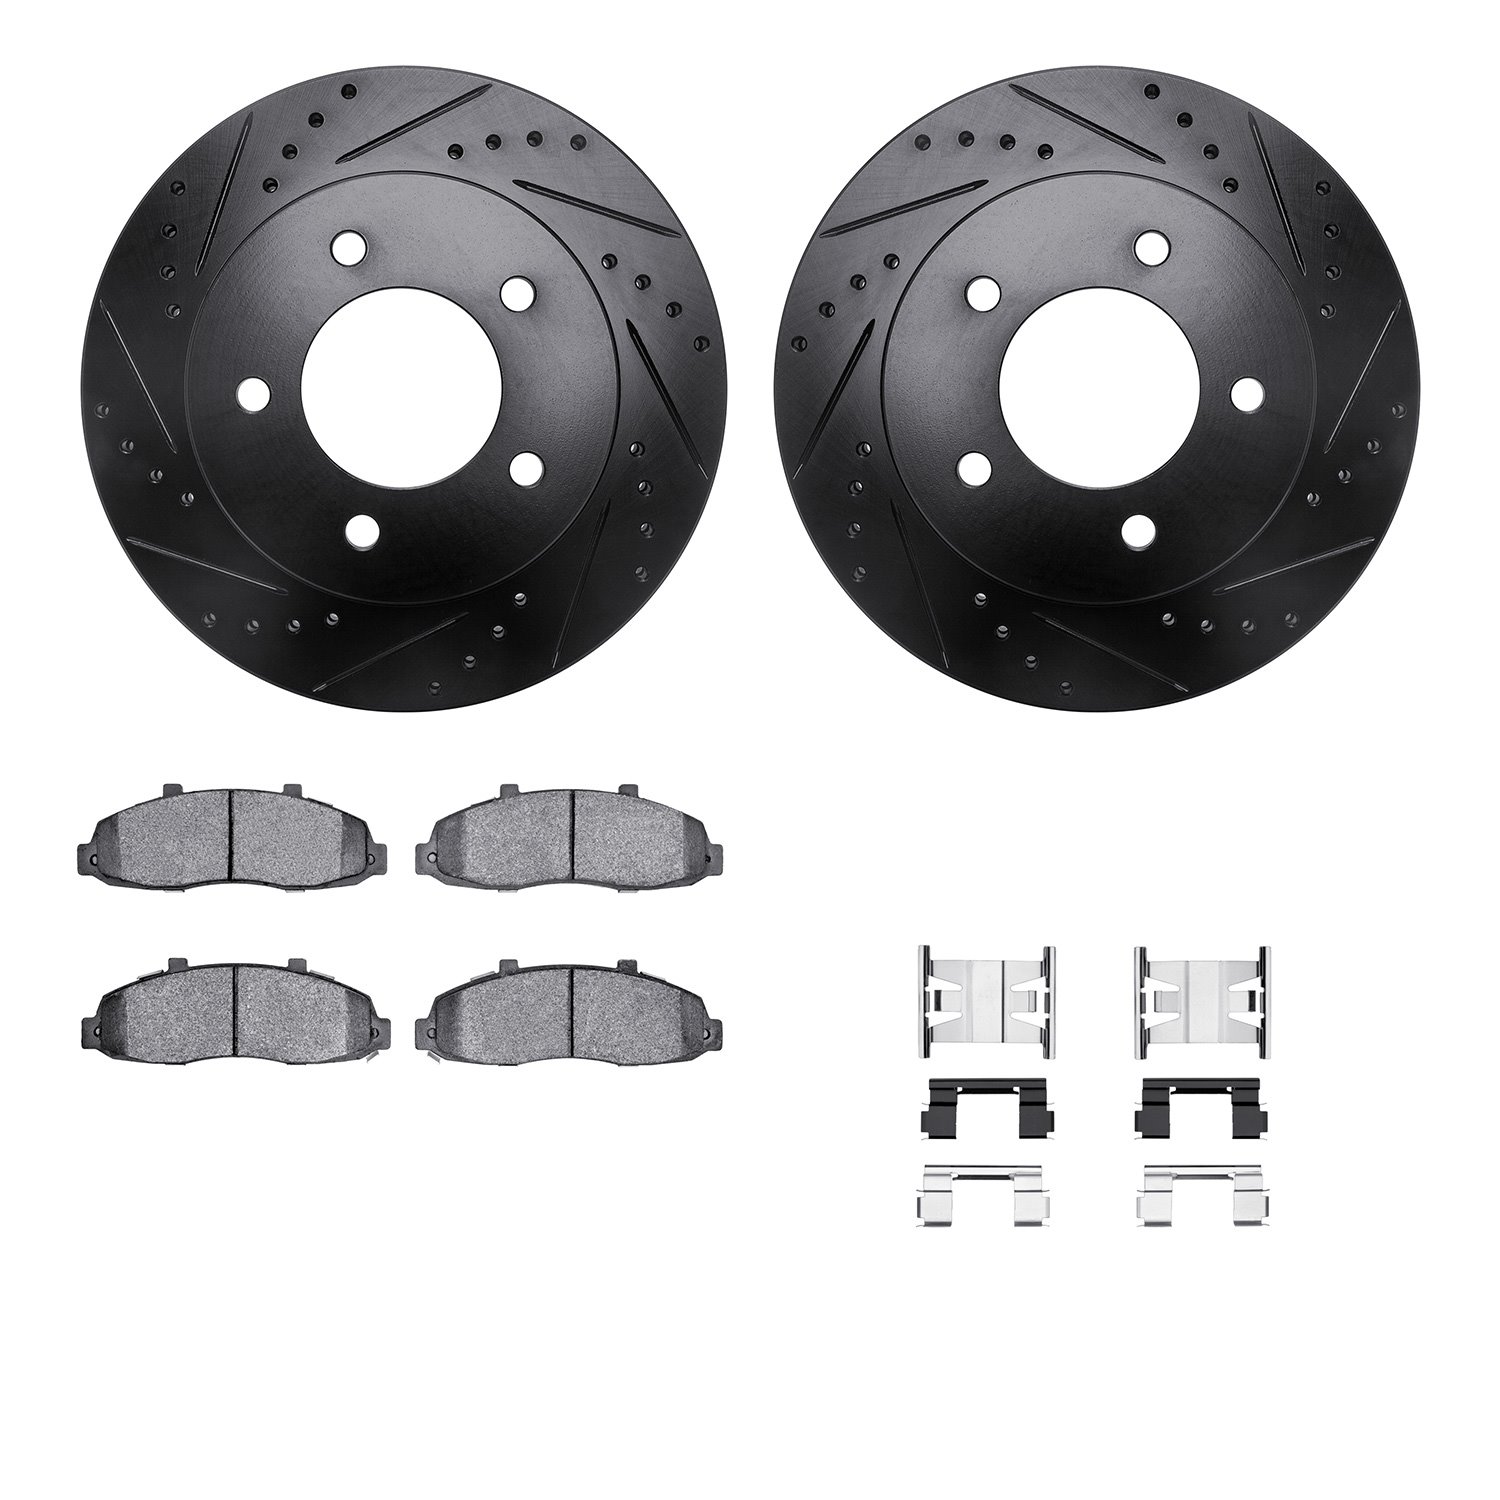 8412-54035 Drilled/Slotted Brake Rotors with Ultimate-Duty Brake Pads Kit & Hardware [Black], 1997-2004 Ford/Lincoln/Mercury/Maz